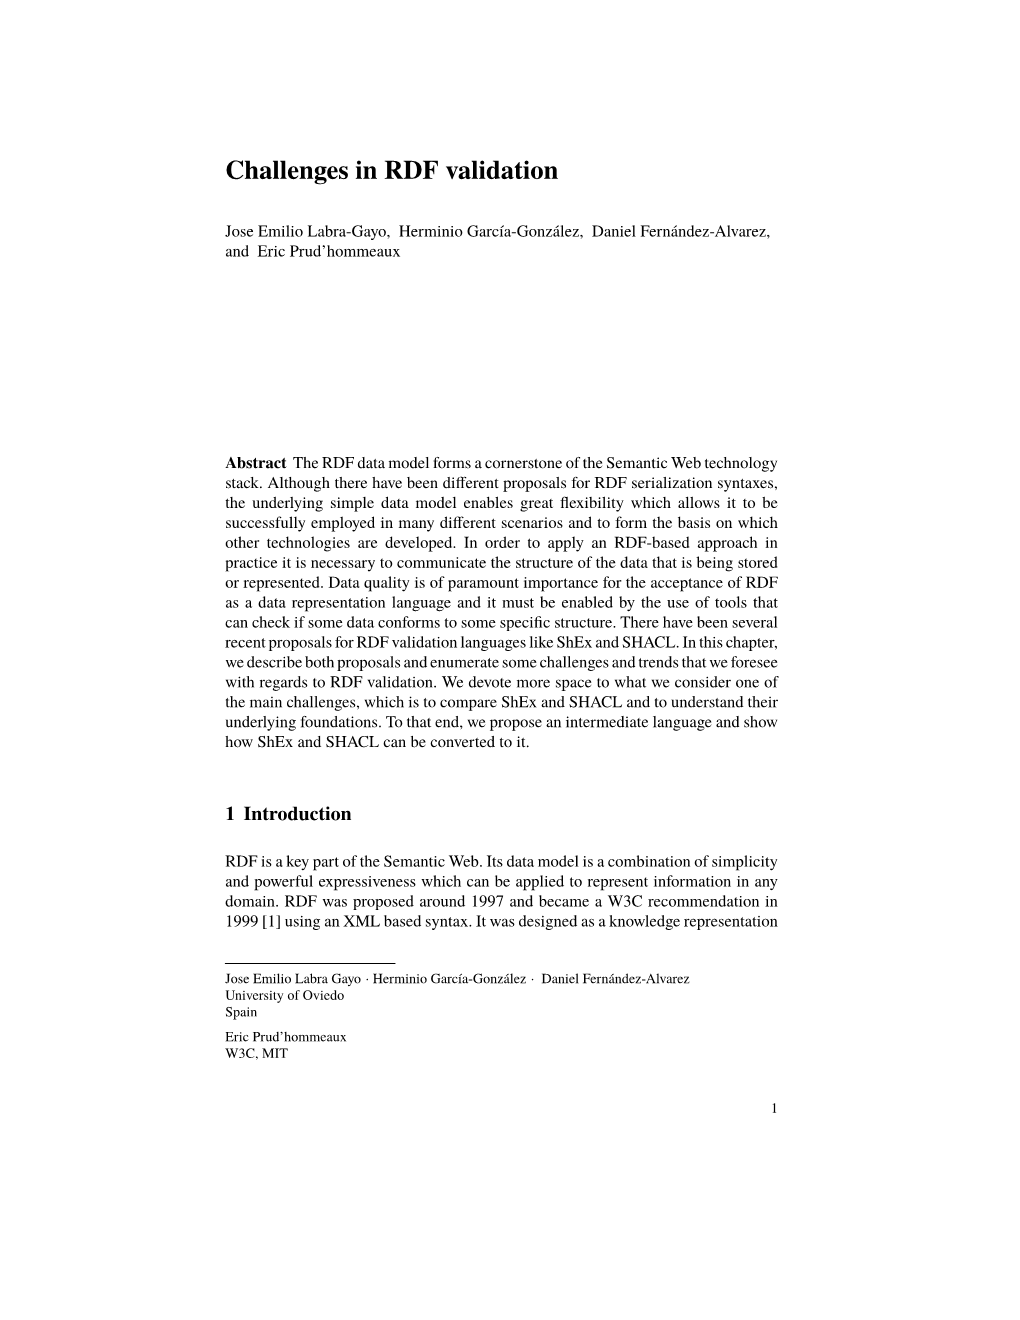 Challenges in RDF Validation